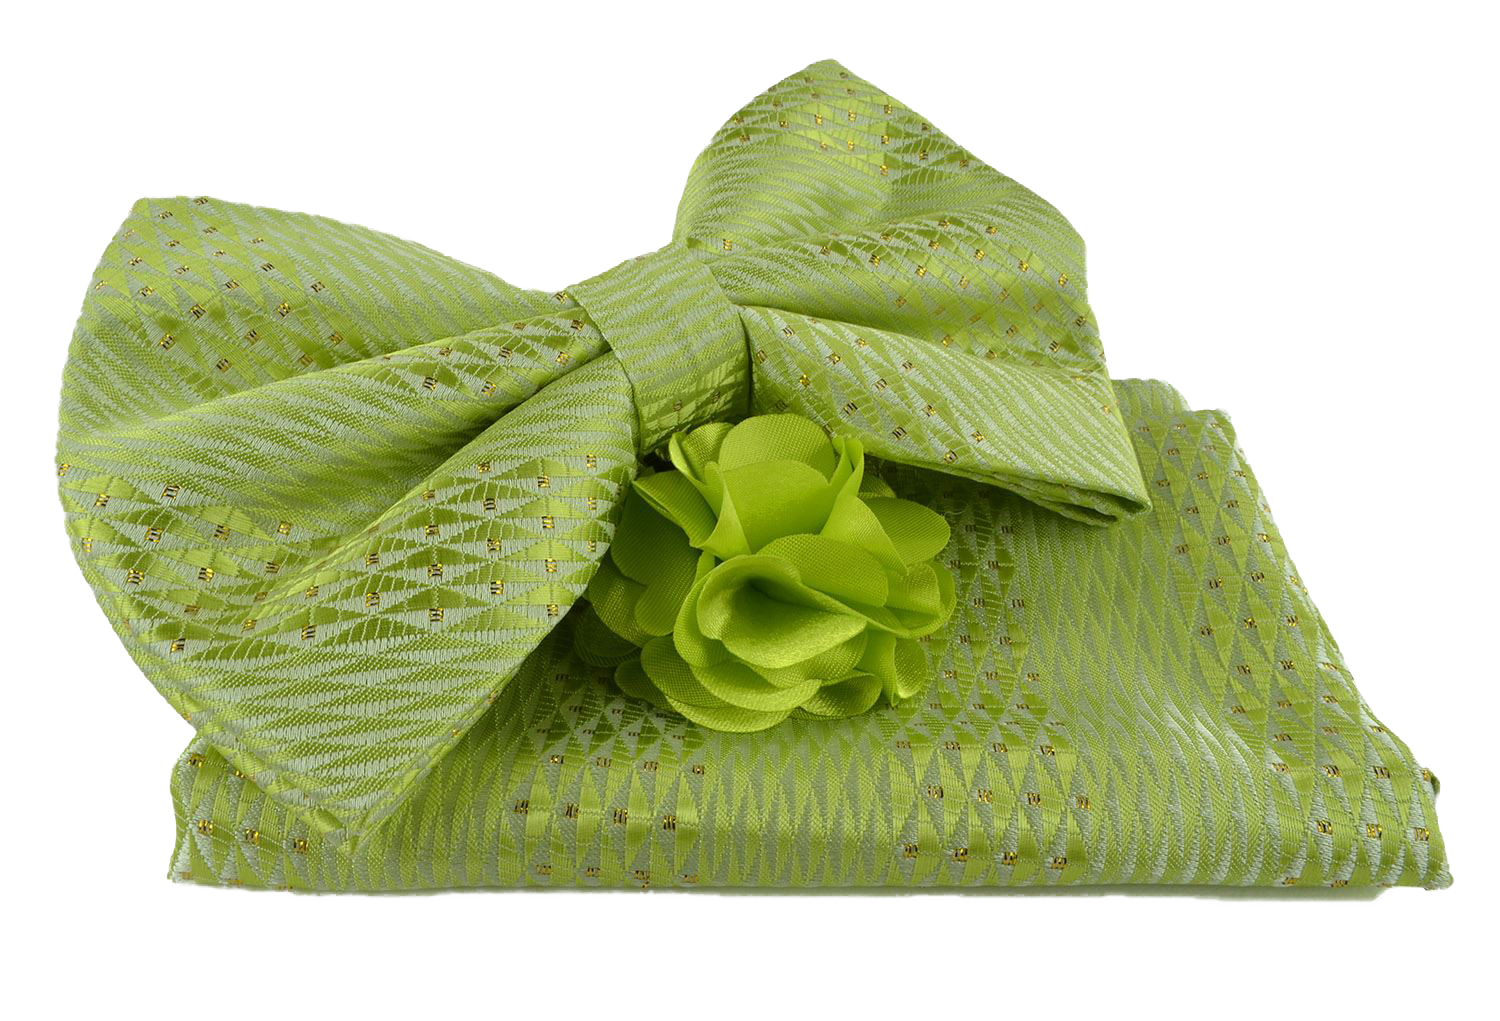 Uomo Vennetto Men's Green Woven Bow Tie with Hanky and Lapel Flower